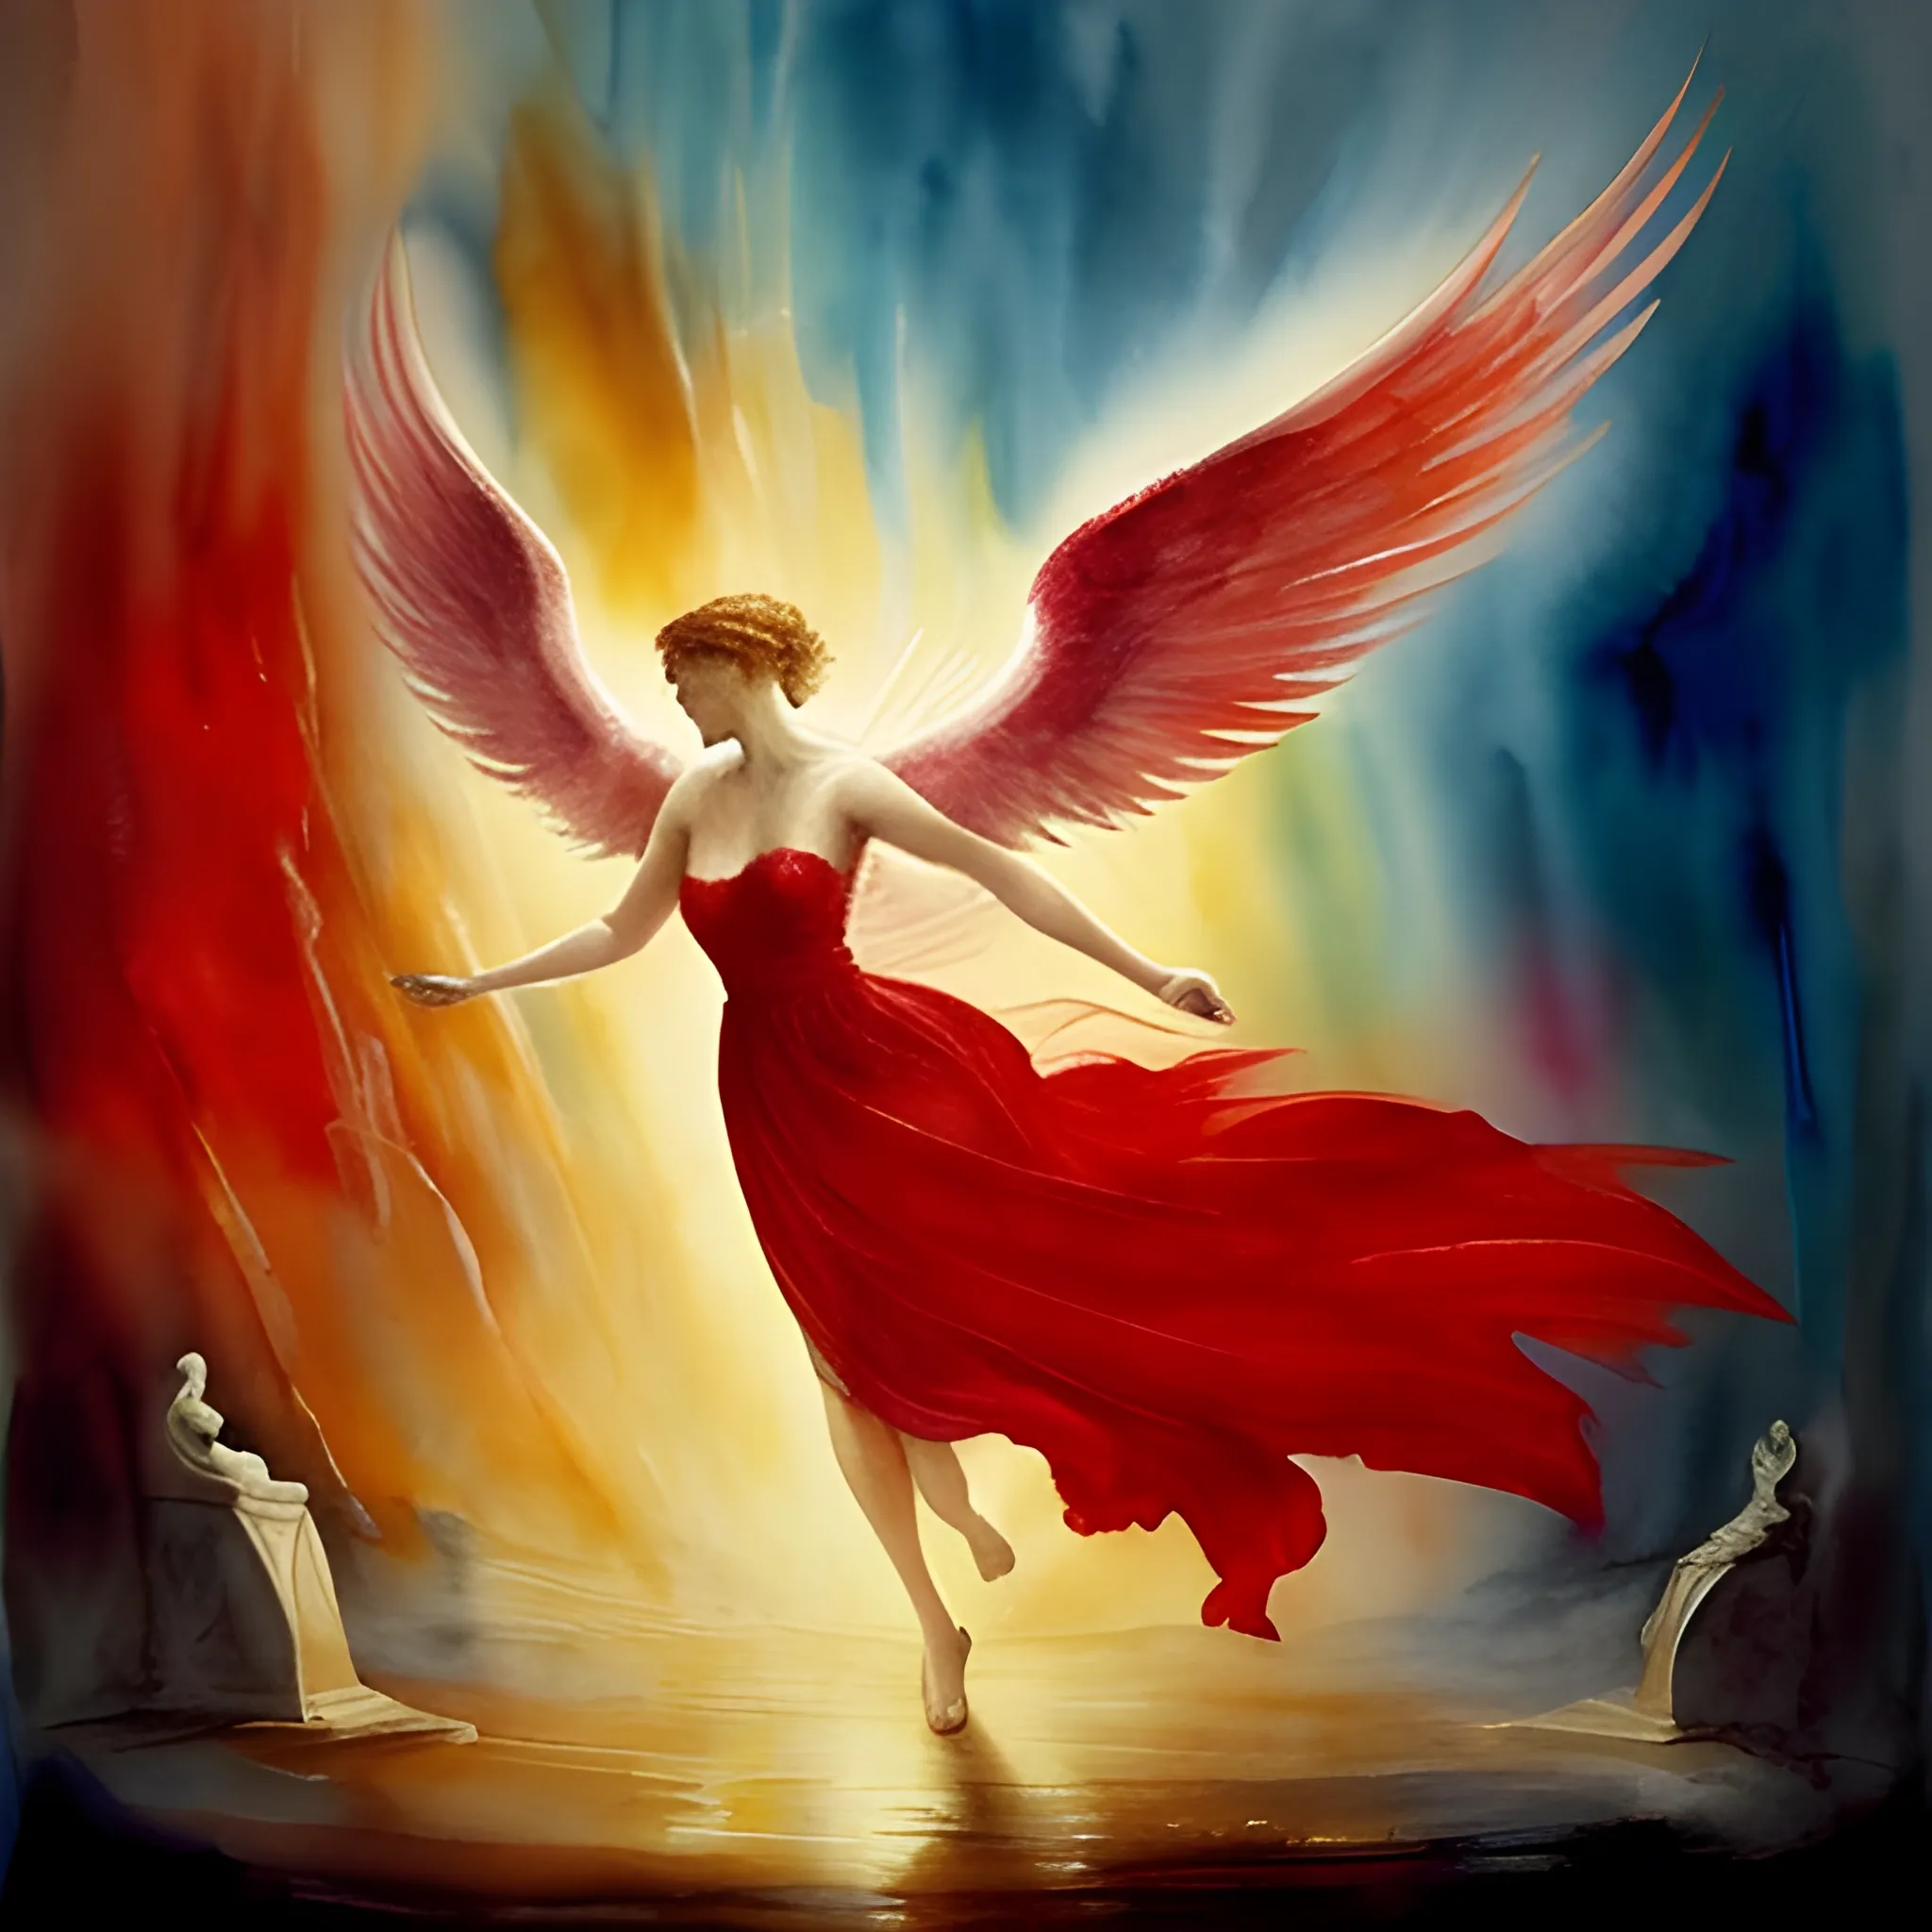 Illustrate a powerful scene of a woman with majestic wings rising from an ancient, mystical altar. Use watercolor techniques reminiscent of the renowned painter J.M.W. Turner, with the predominant use of the color red to capture the enchanting moment of ascension.